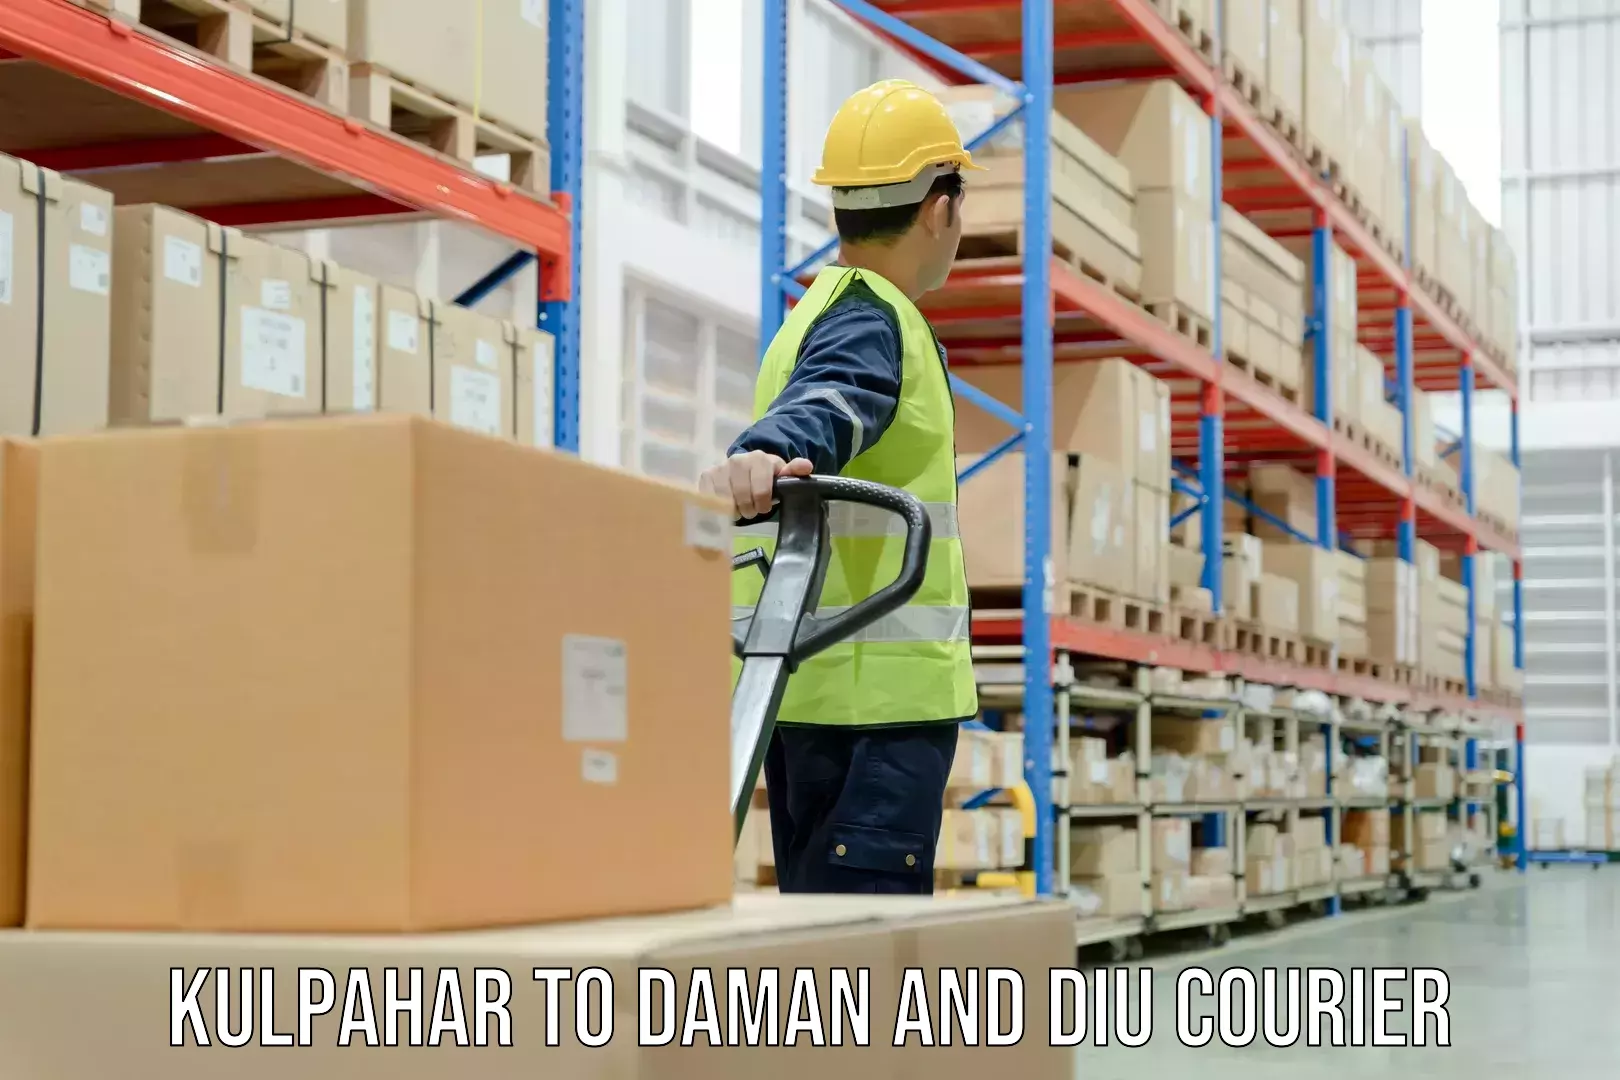 State-of-the-art courier technology Kulpahar to Daman and Diu